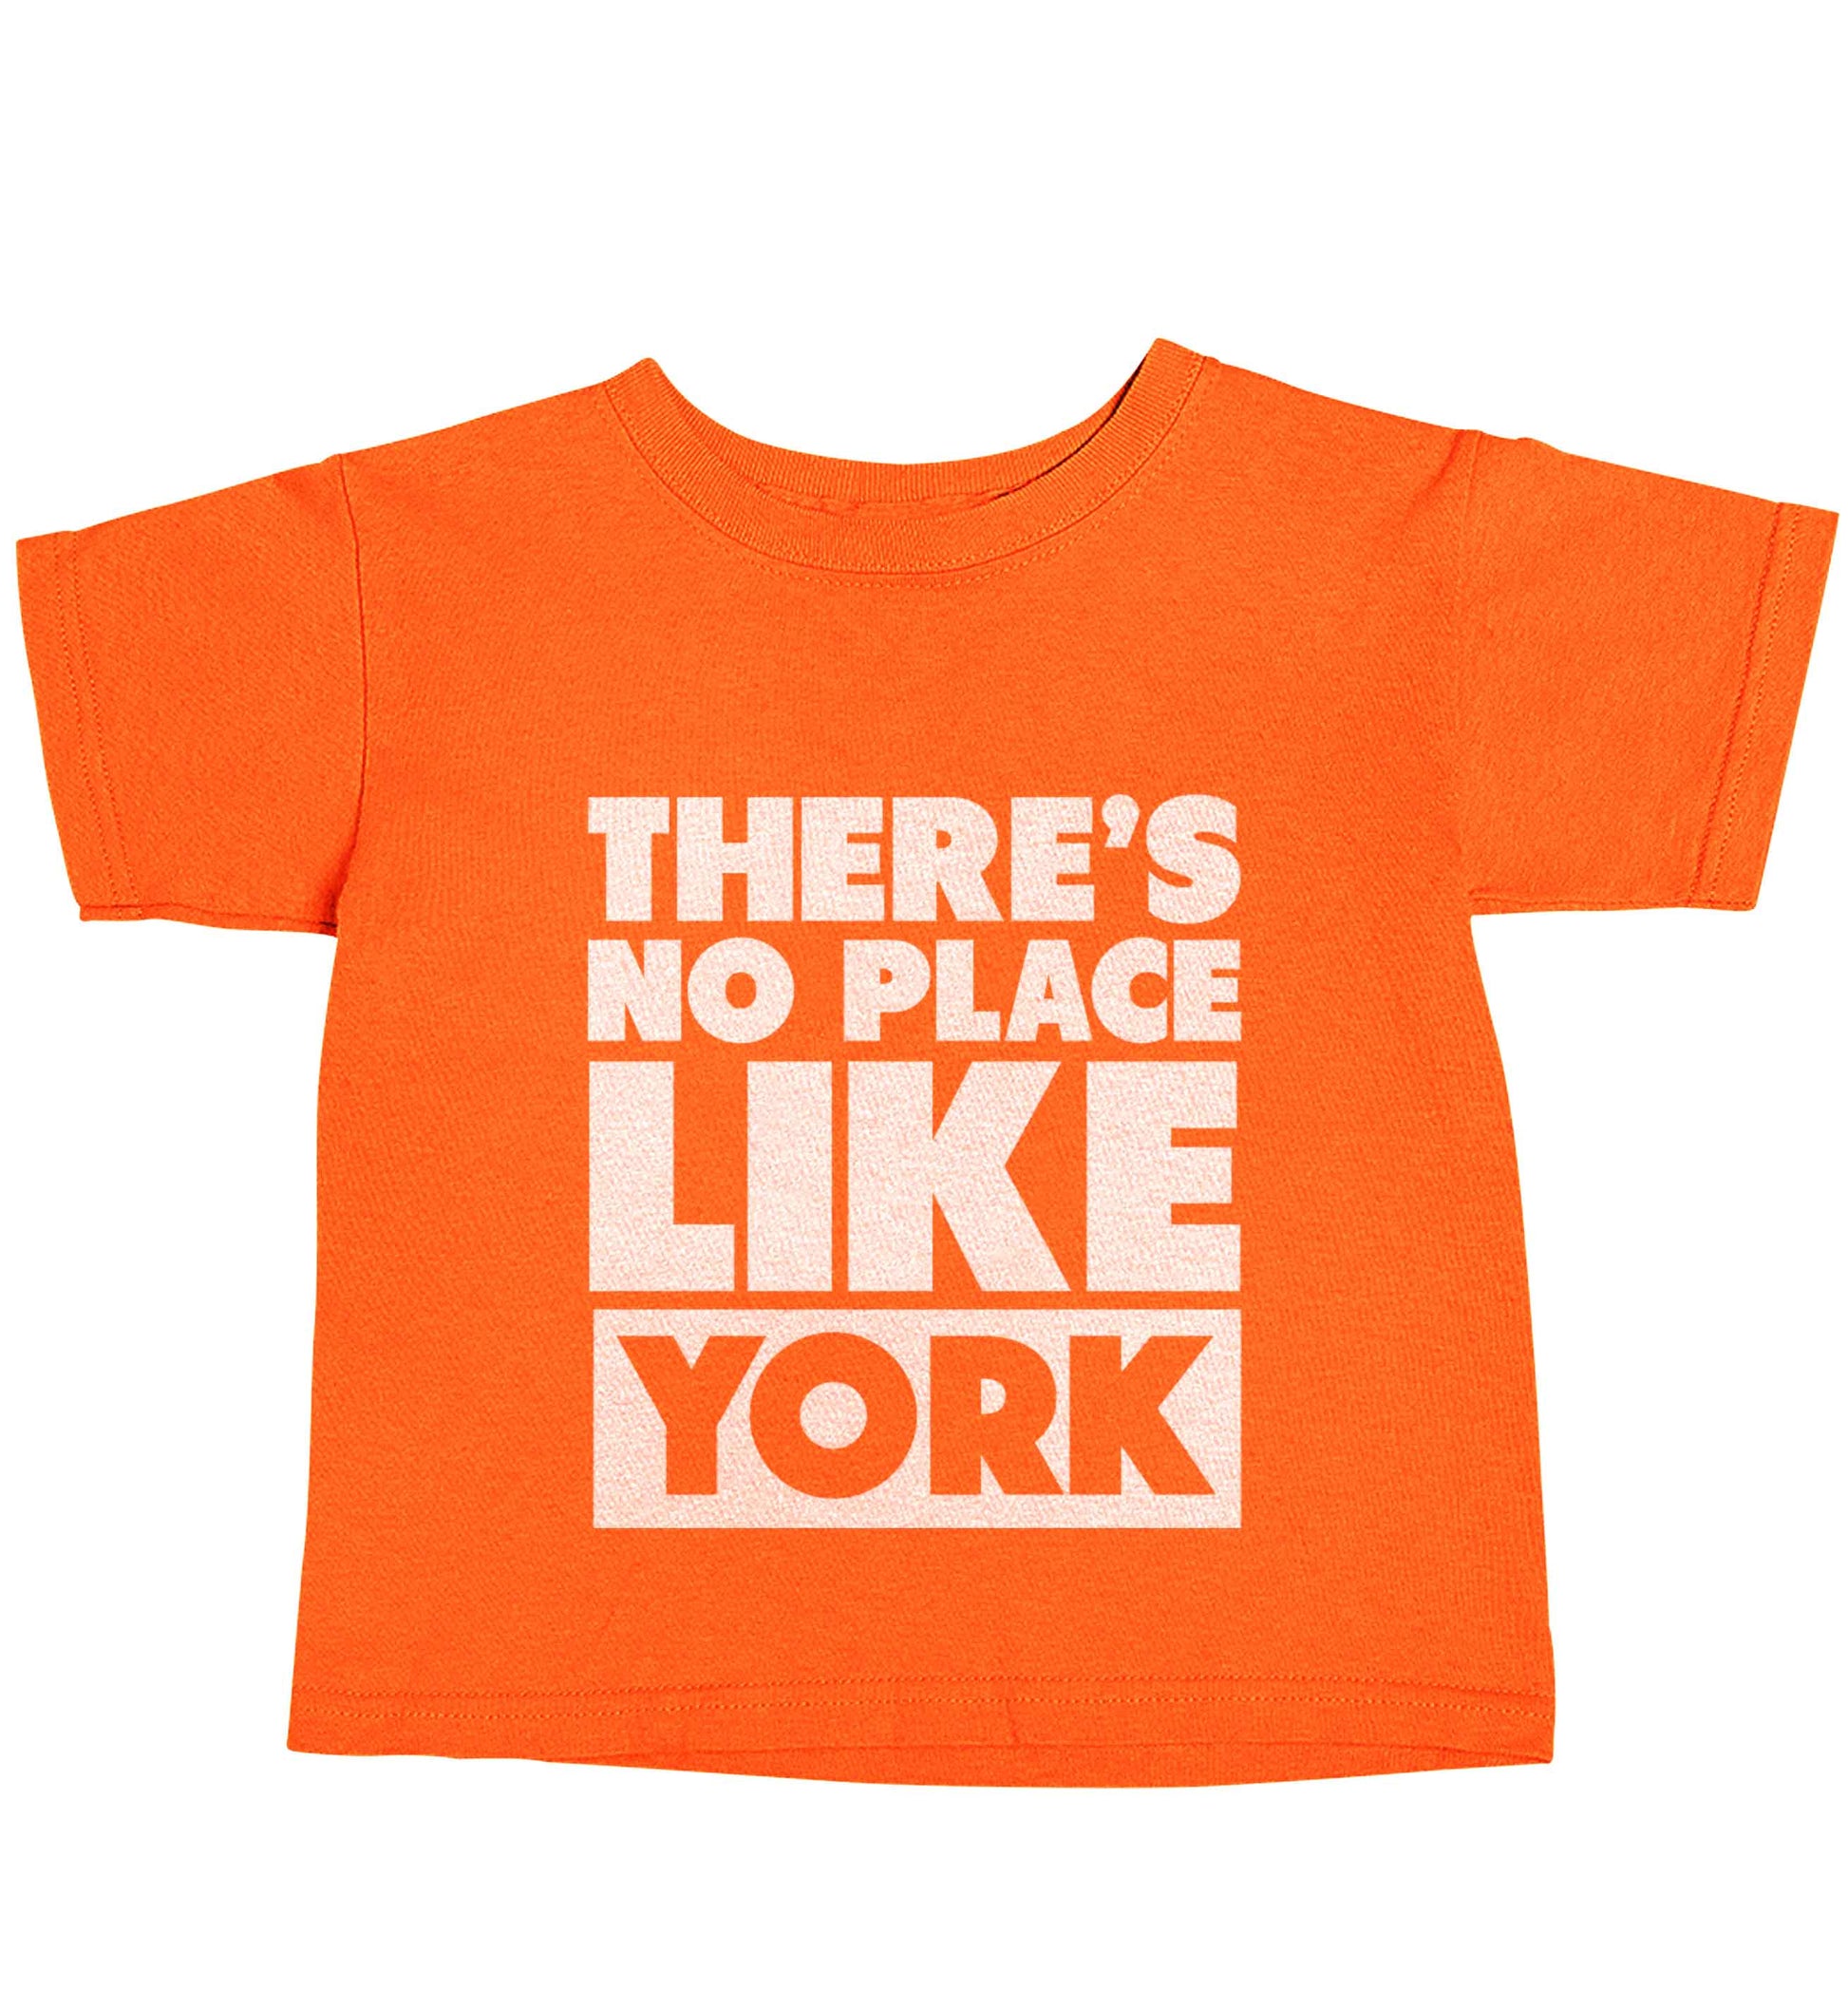 There's no place like york orange baby toddler Tshirt 2 Years